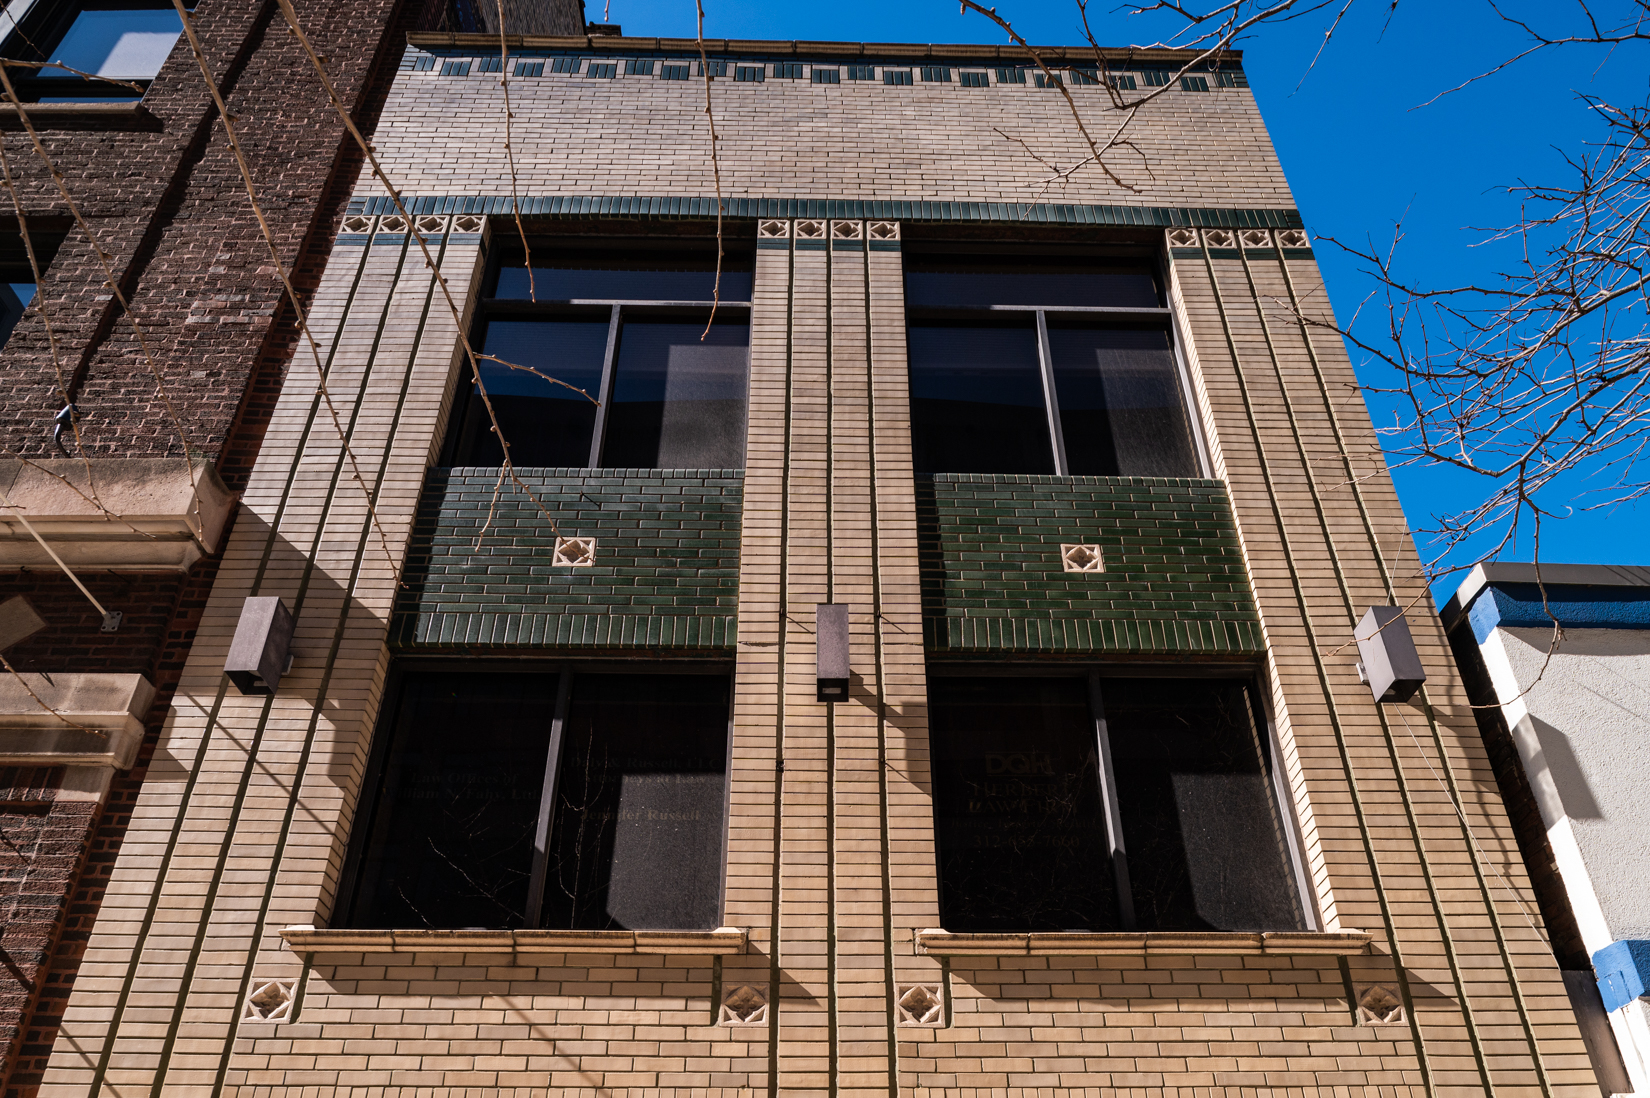 The Warehouse, Birthplace Of House Music, Is Now A Chicago Landmark